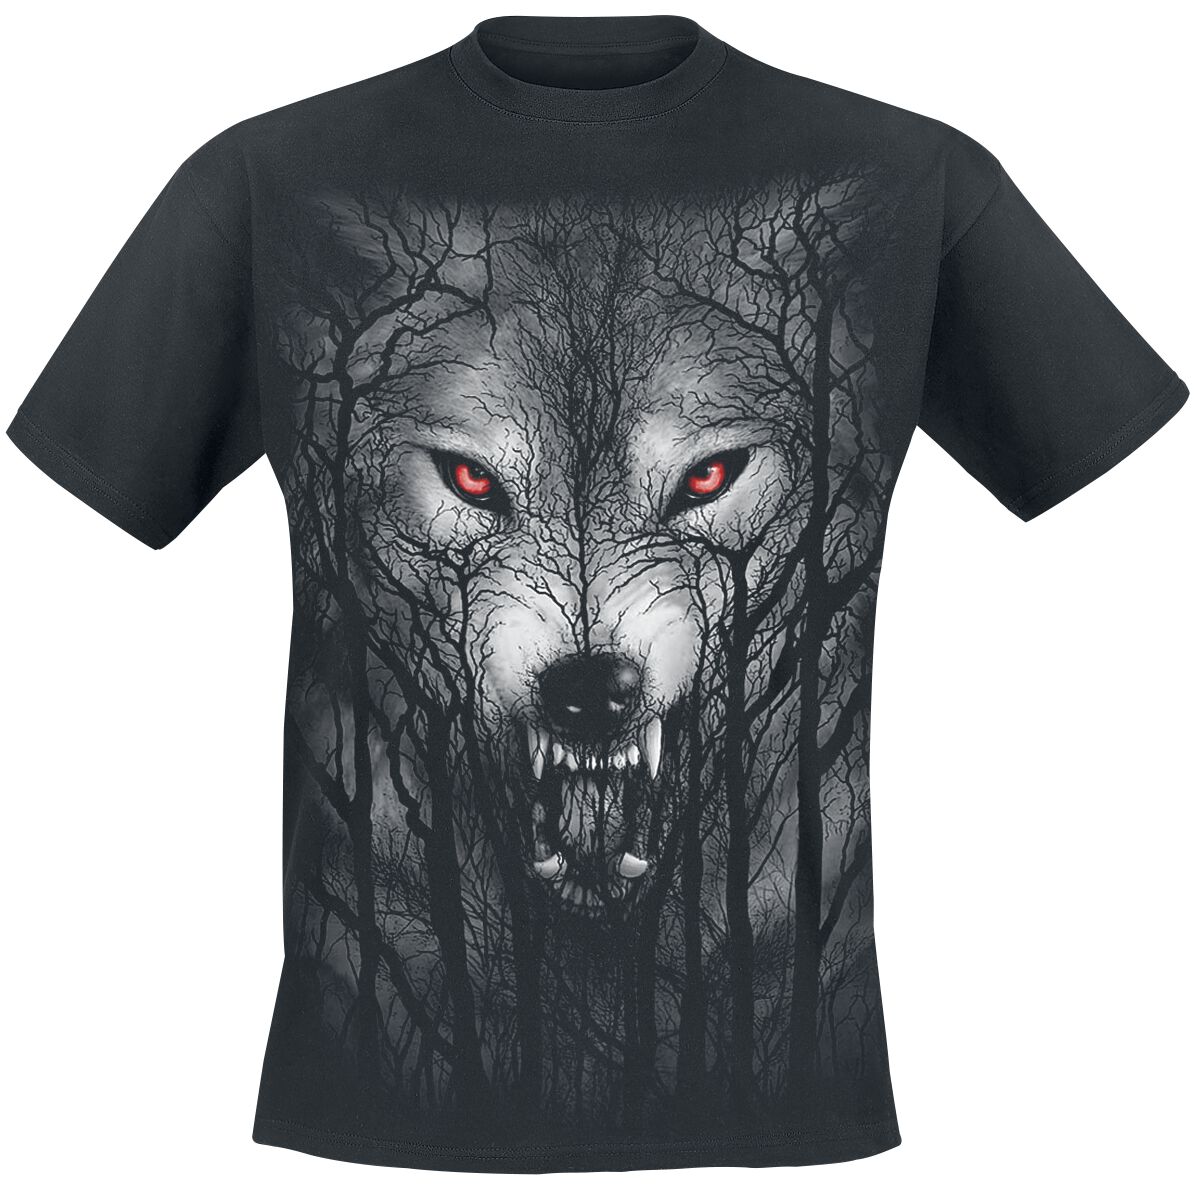 Image of T-Shirt Gothic di Spiral - Forest Wolf - L a XXL - Uomo - nero